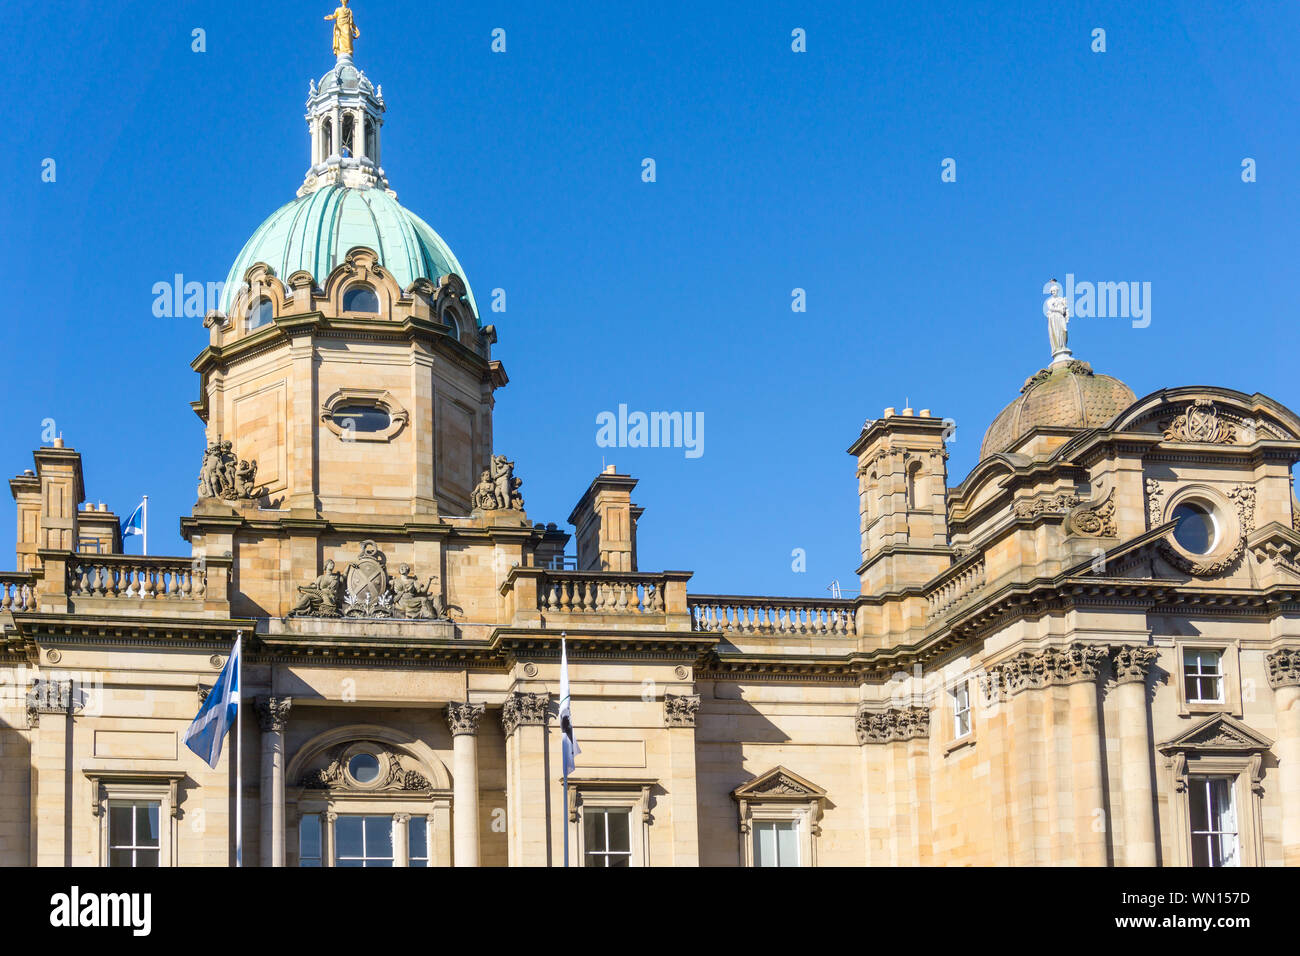 Low Angle View Of Hbos Headquarters Against Clear Blue Sky Stock Photo